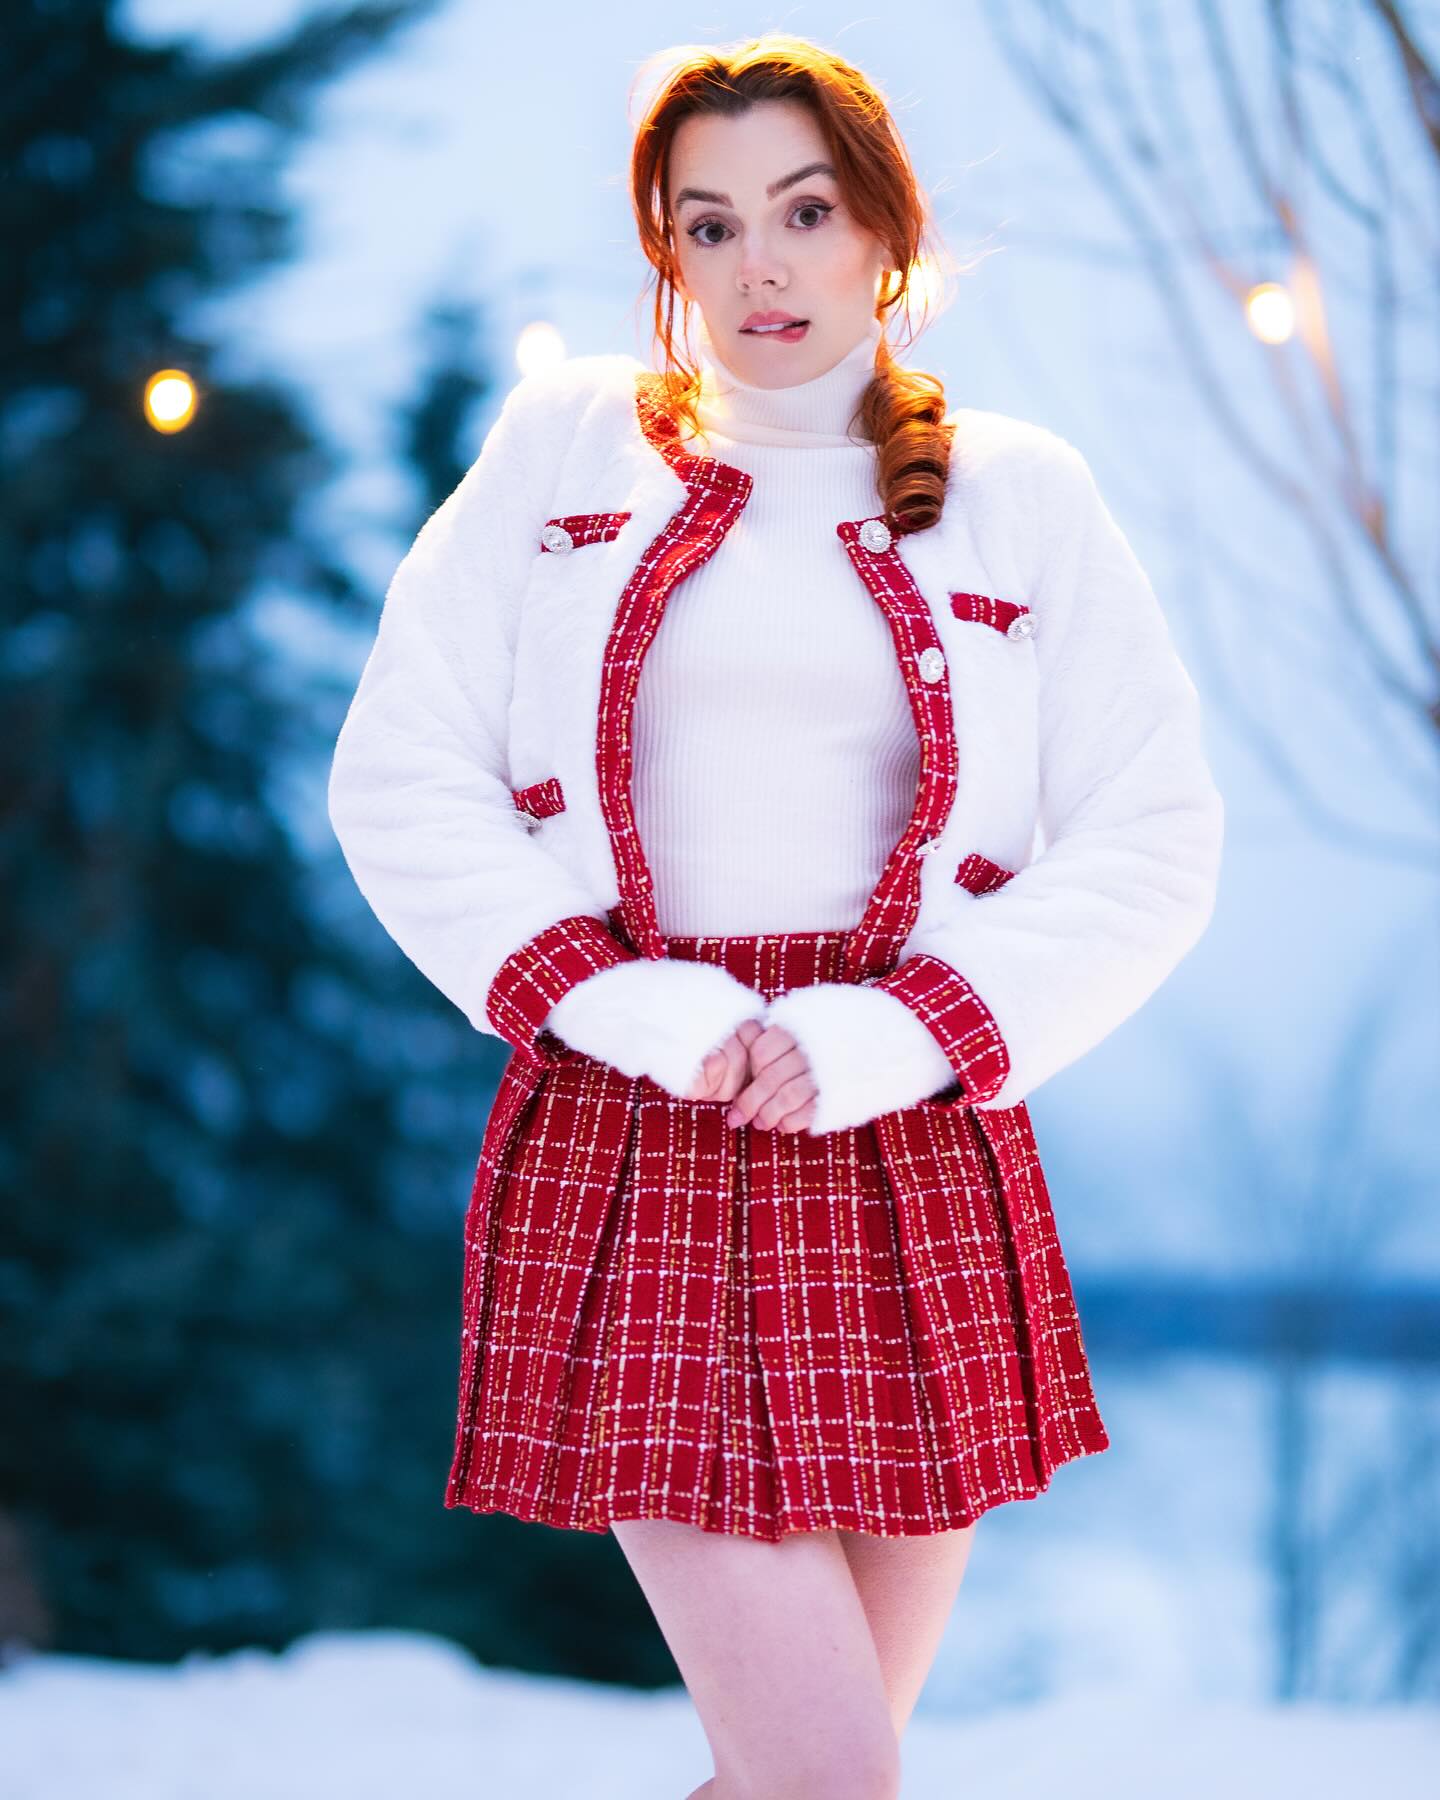 It seems like cold weather is finally done for this year, I’ll miss how good photos look in the snow but thats about it ♥️

Photo shot by @kameraninja